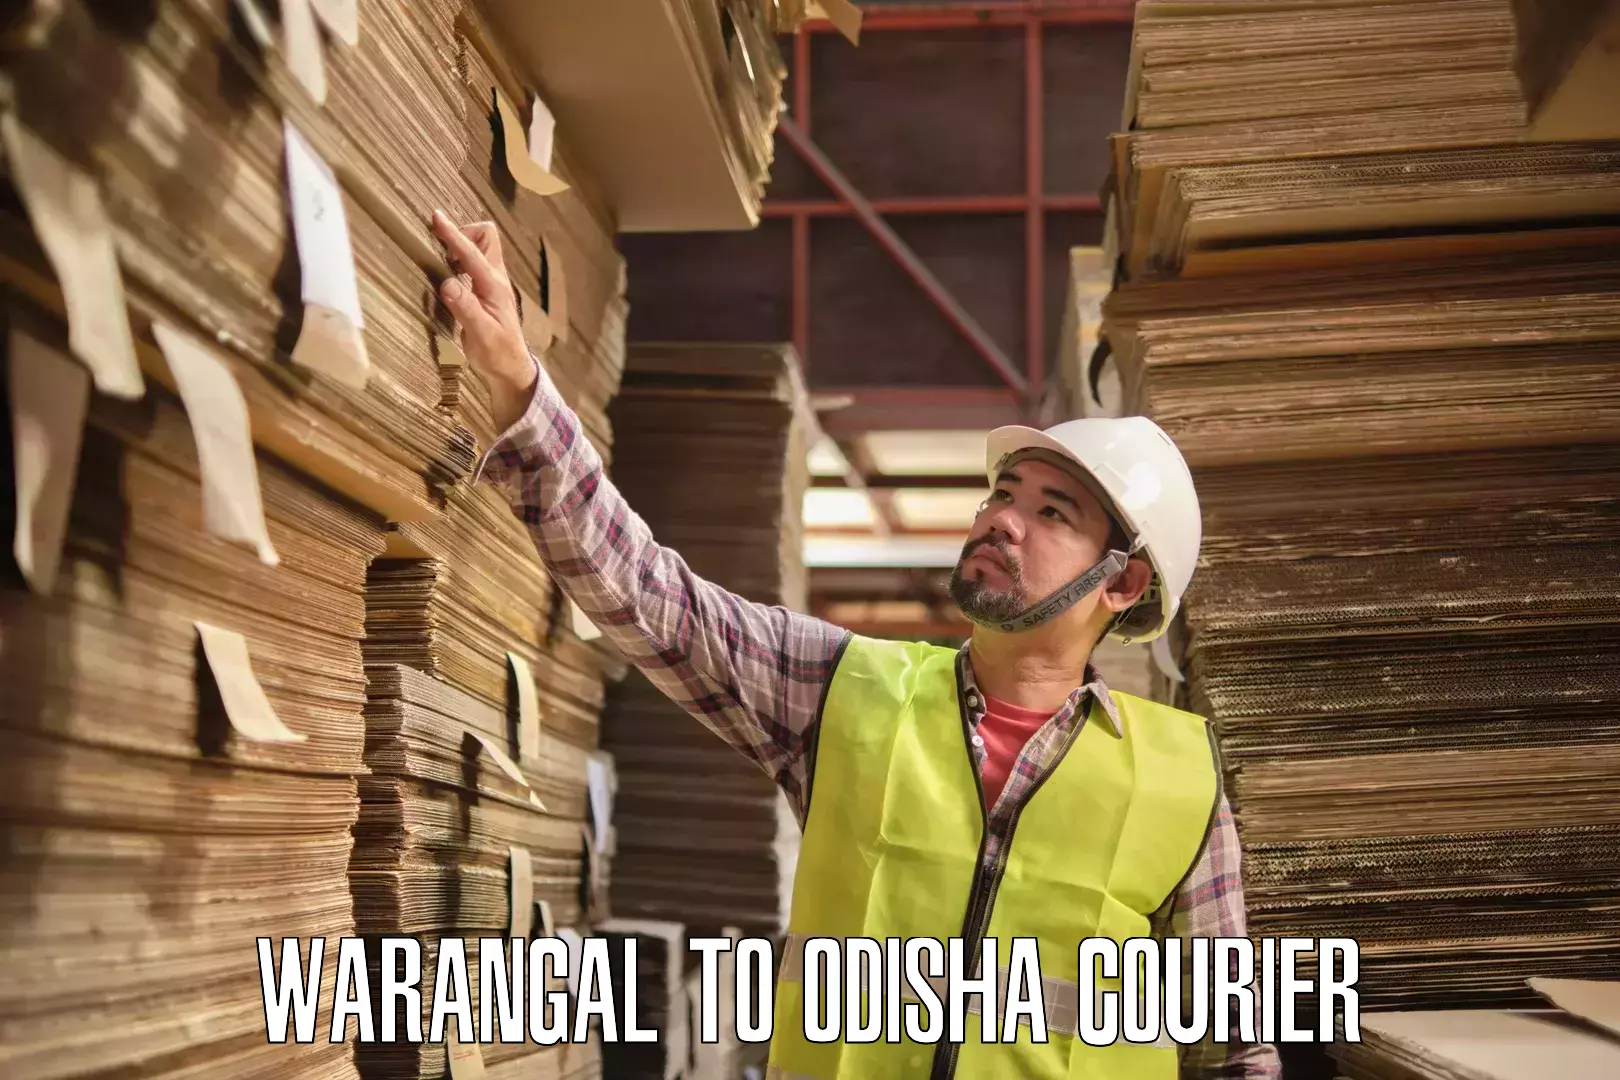 Easy access courier services Warangal to Mathili